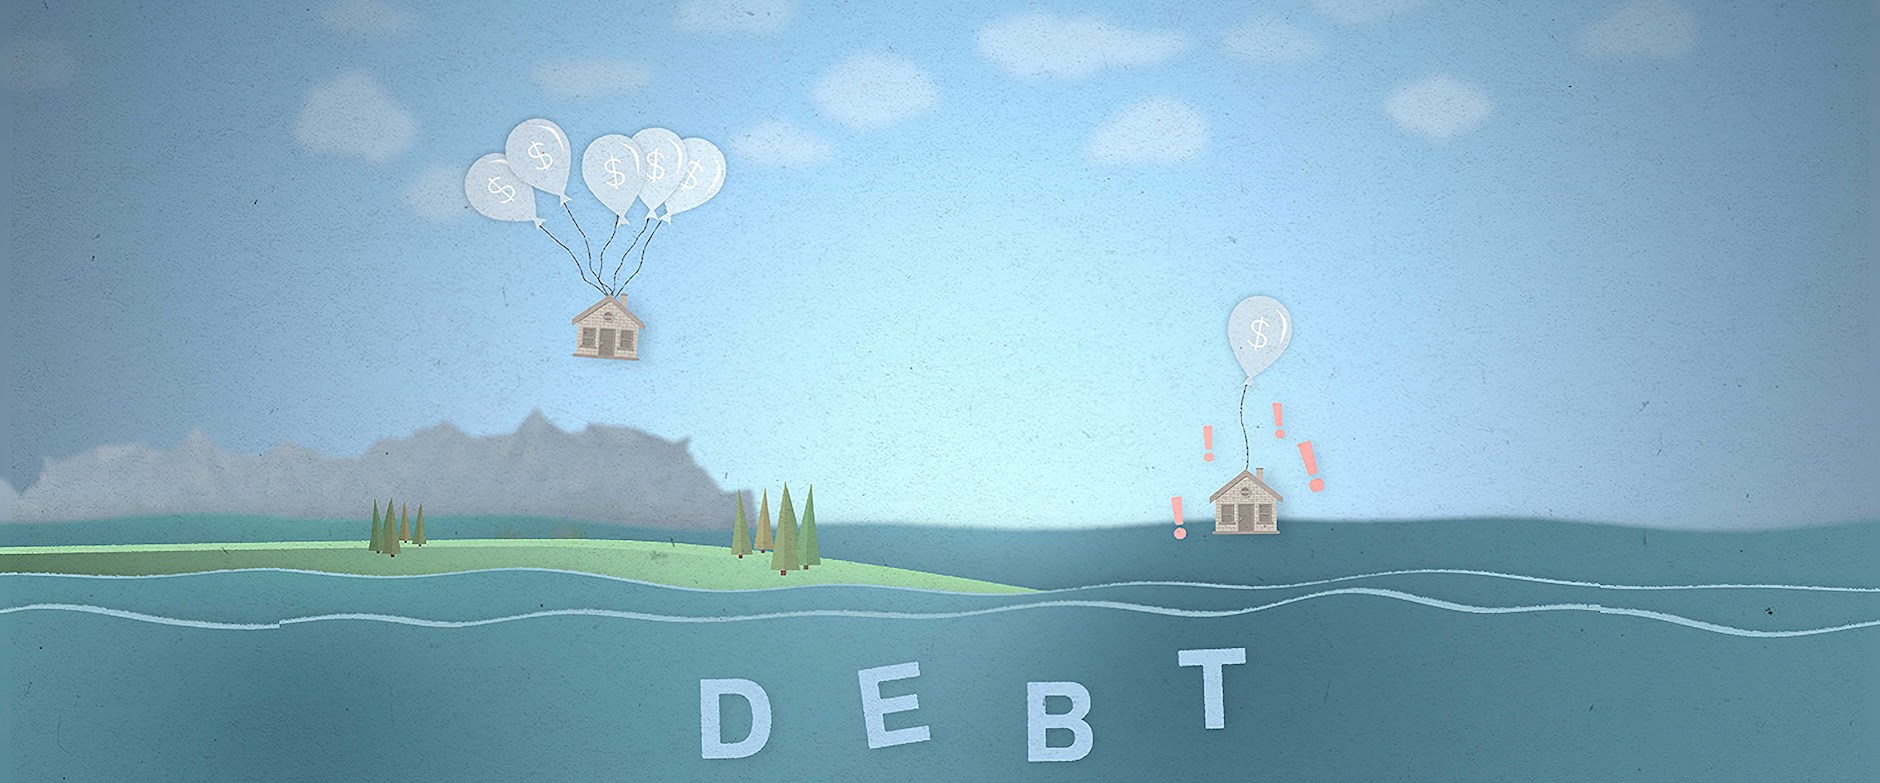 An illustration of a sea that spells "DEBT" and houses floating in it, one being held up by balloons with dollar signs